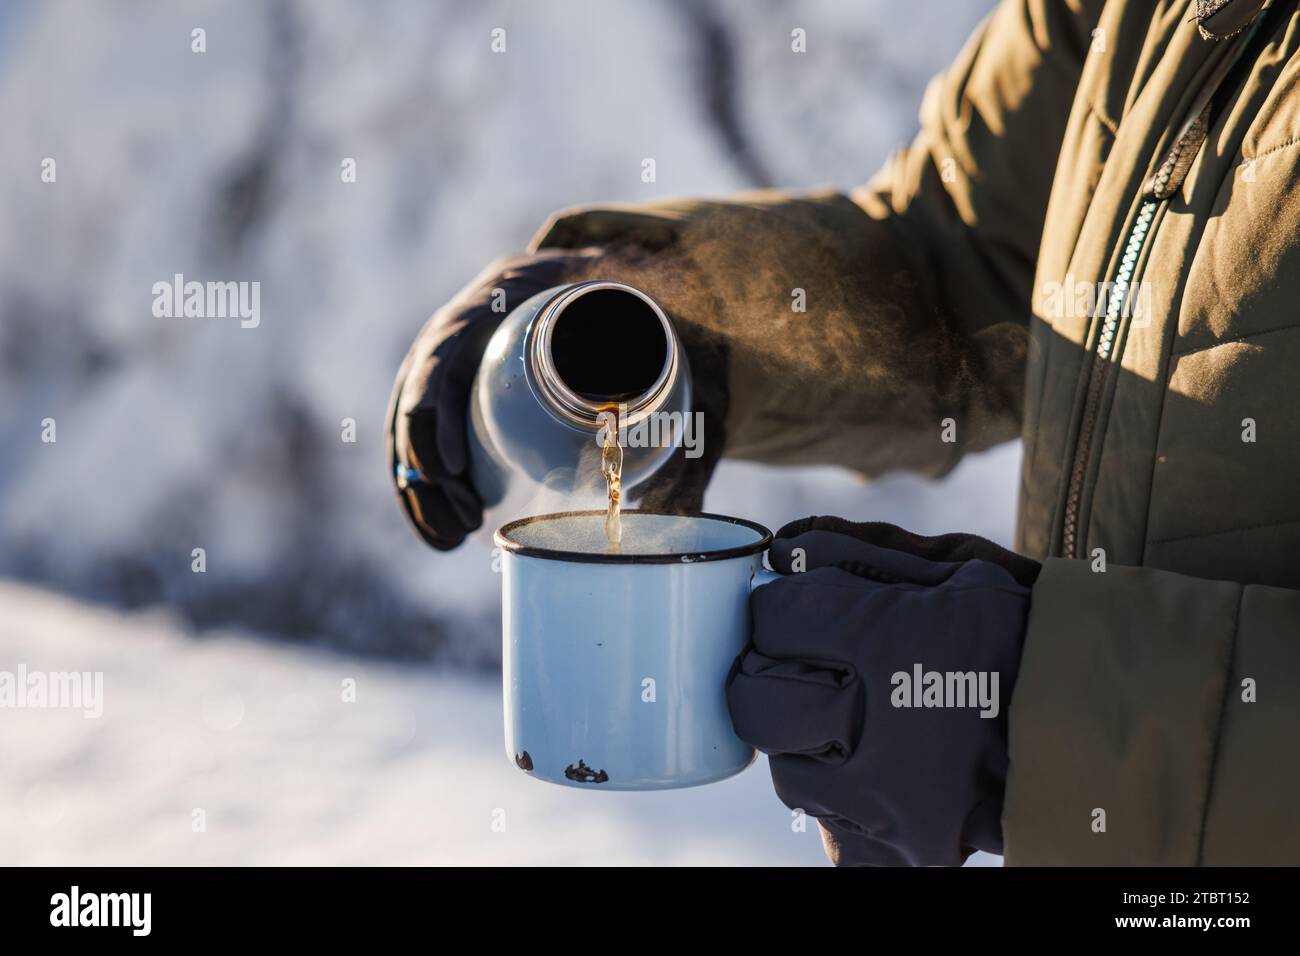 https://c8.alamy.com/comp/2TBT152/hiker-pouring-hot-drink-from-thermos-into-travel-mug-refreshment-during-winter-trekking-in-cold-weather-2TBT152.jpg